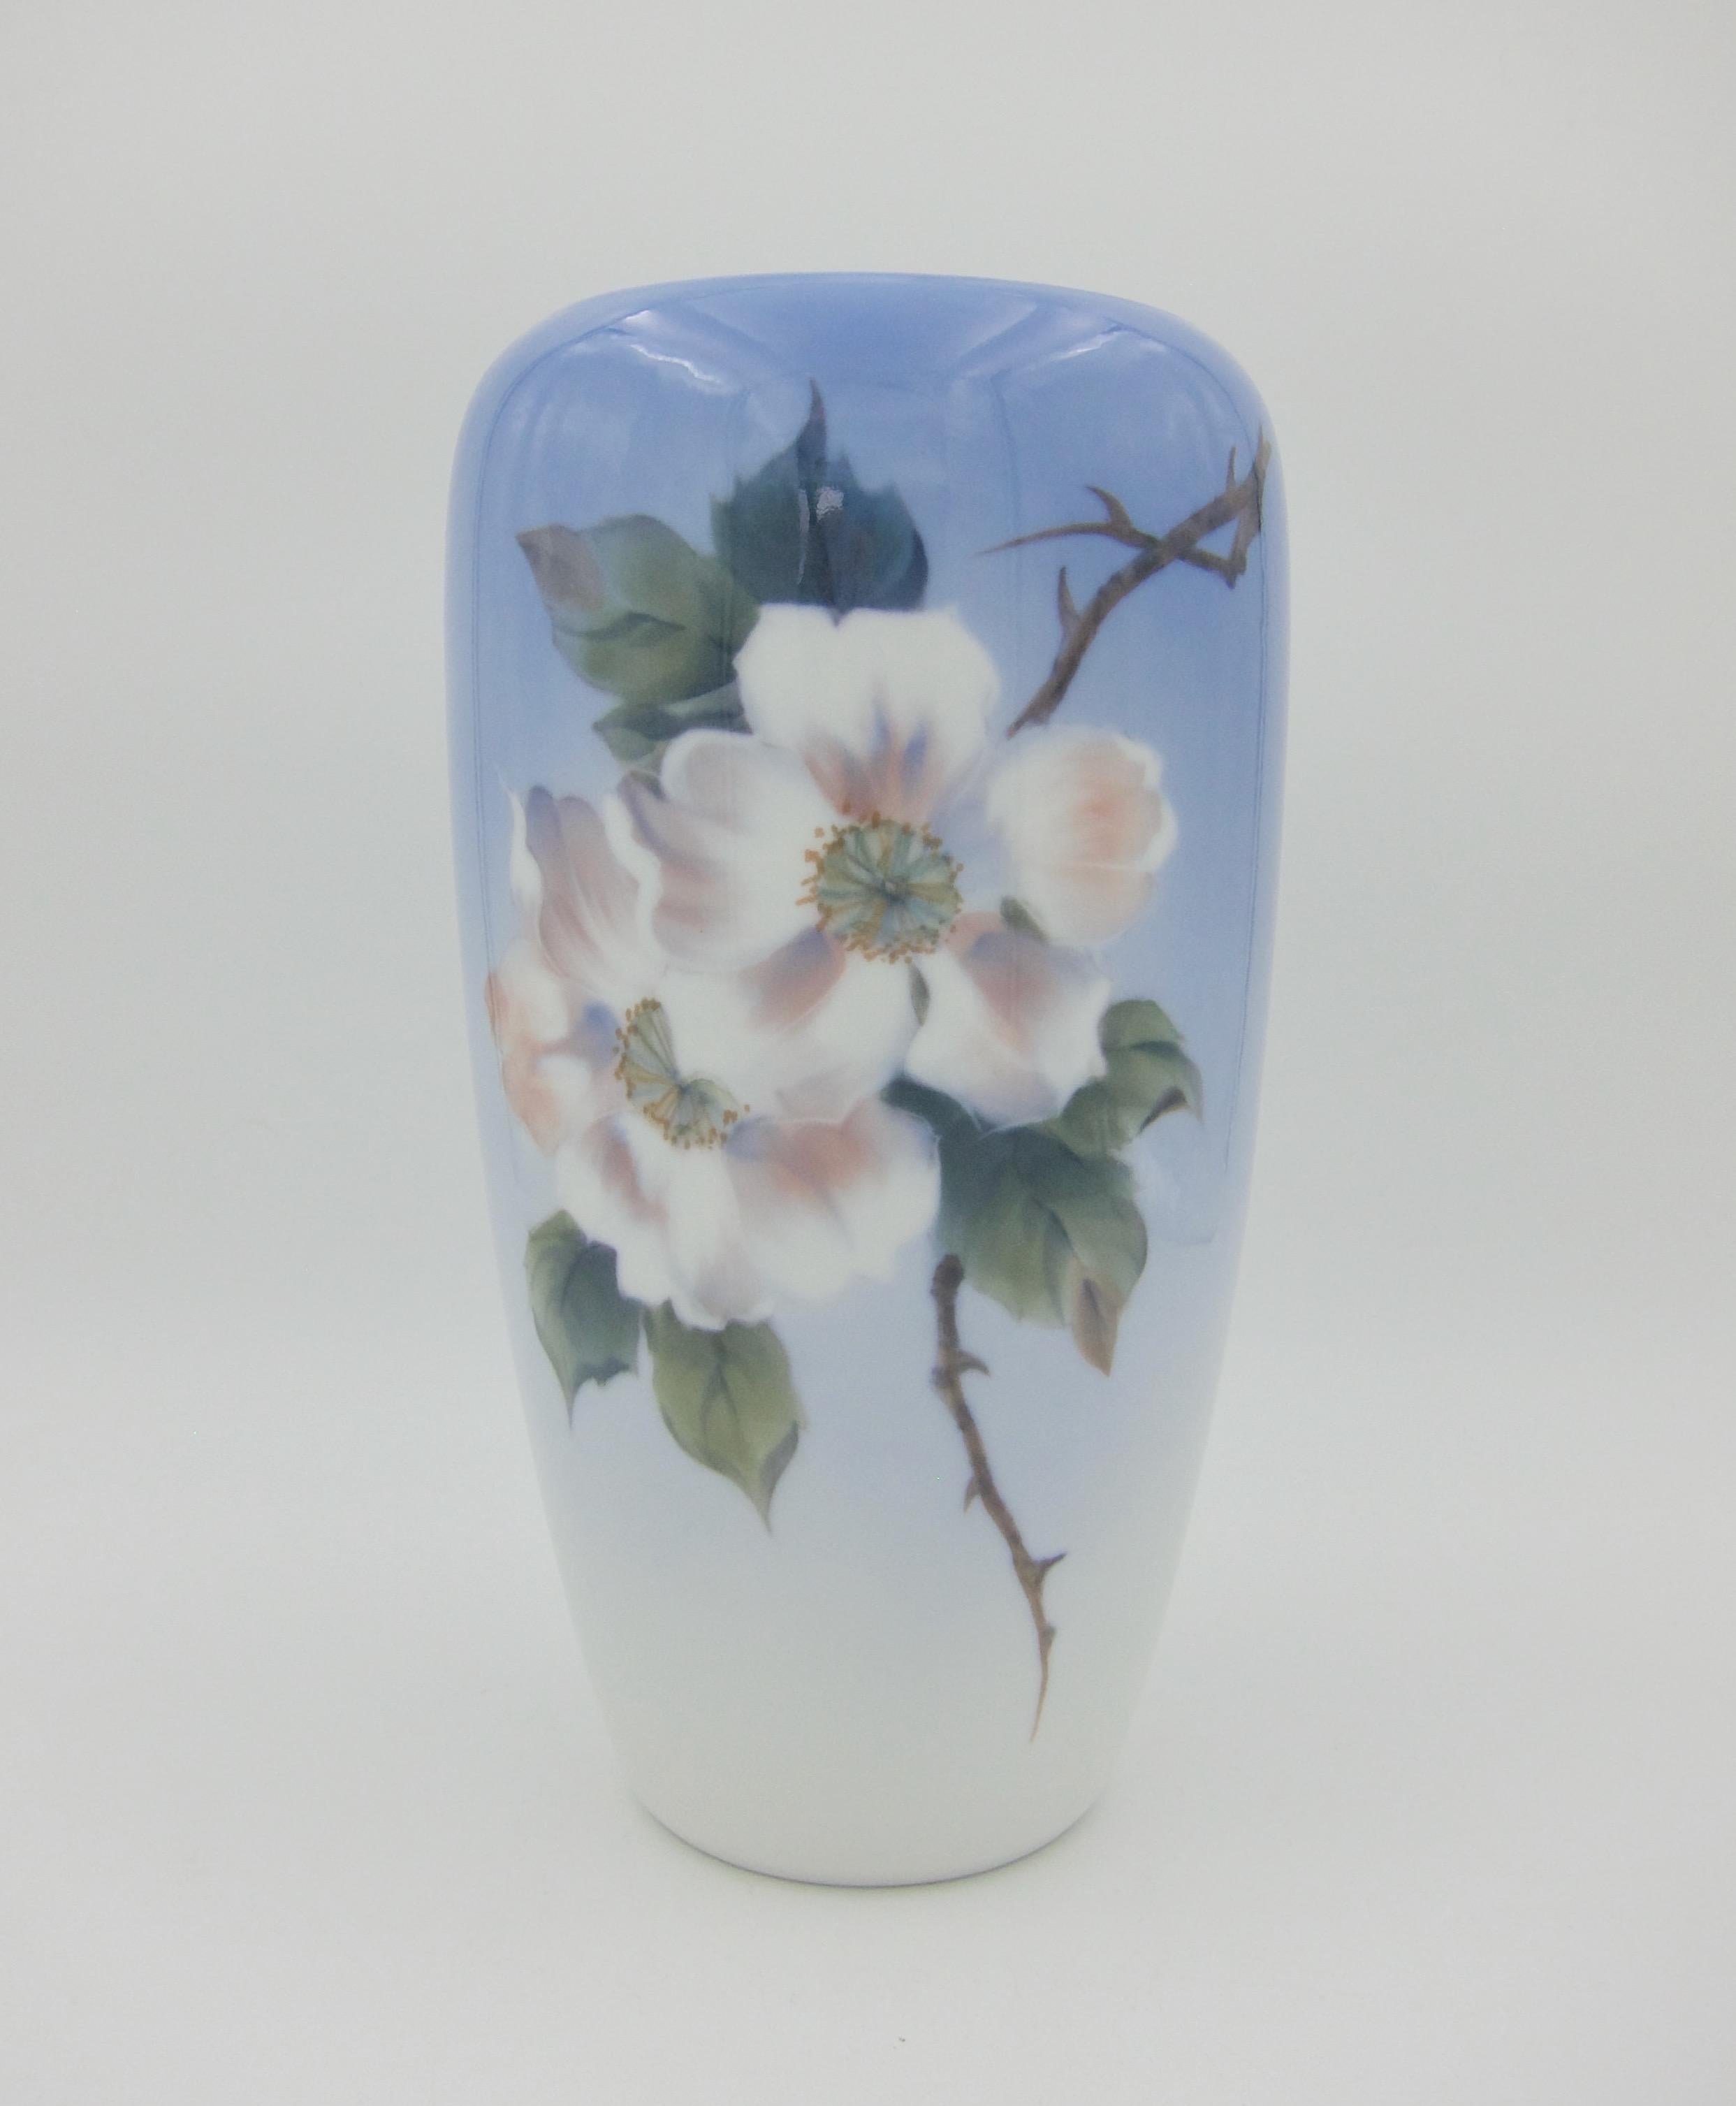 A large porcelain vase hand-painted with a spray of pink and white dogwood blossoms and green leaves with a butterfly on a glossy ombre ground of pale blue from Royal Copenhagen of Denmark, date marked for 1962. The vase is in very good undamaged